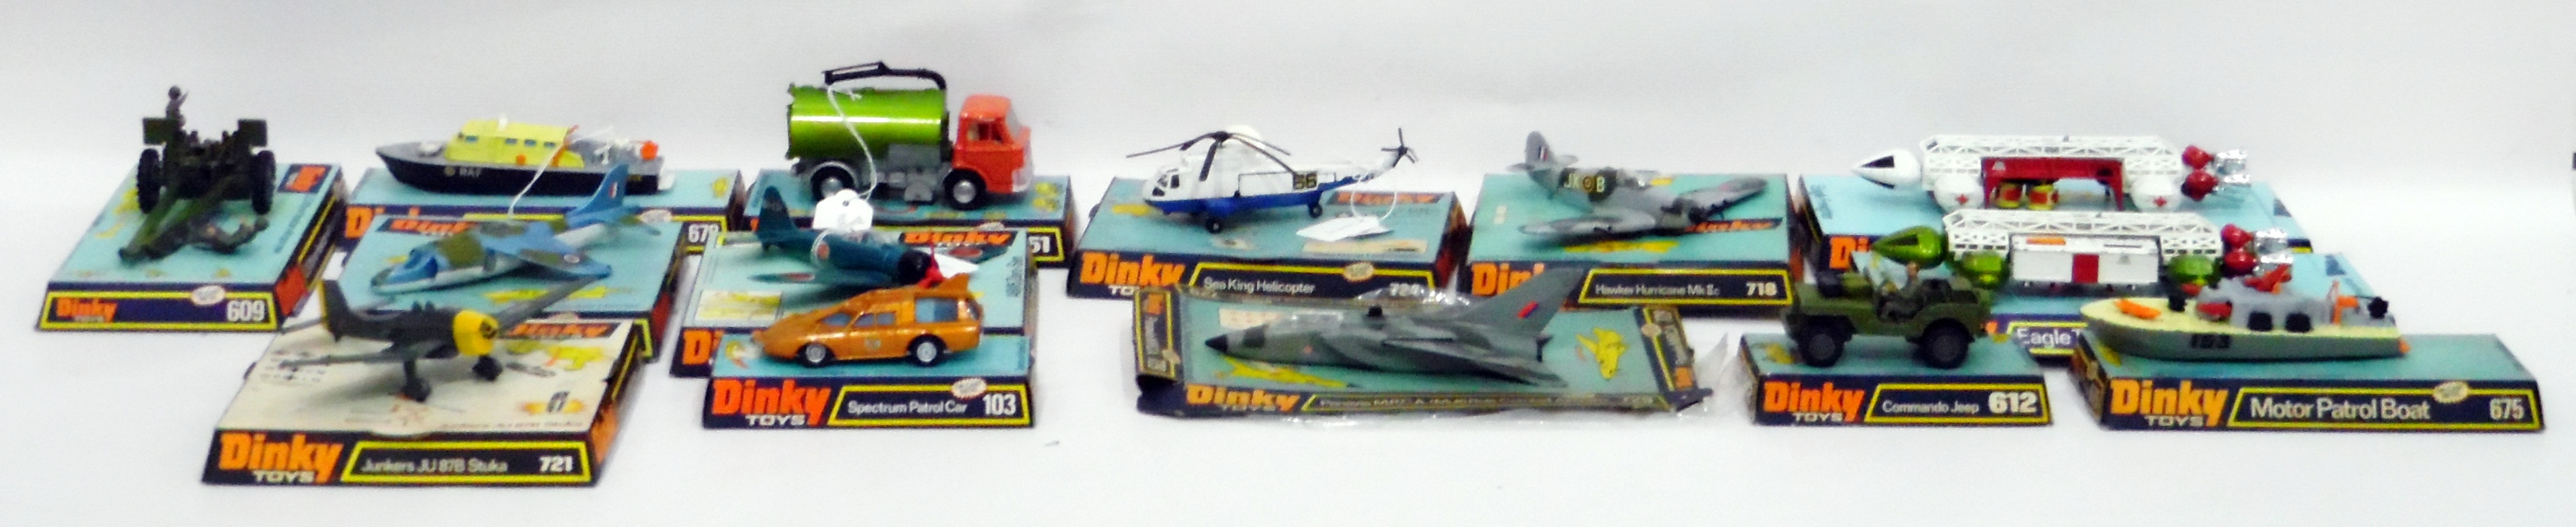 Quantity of Dinky Toy models to include Hawker Harrier, Zero, Stuka, Sea King helicopter, - Image 2 of 2